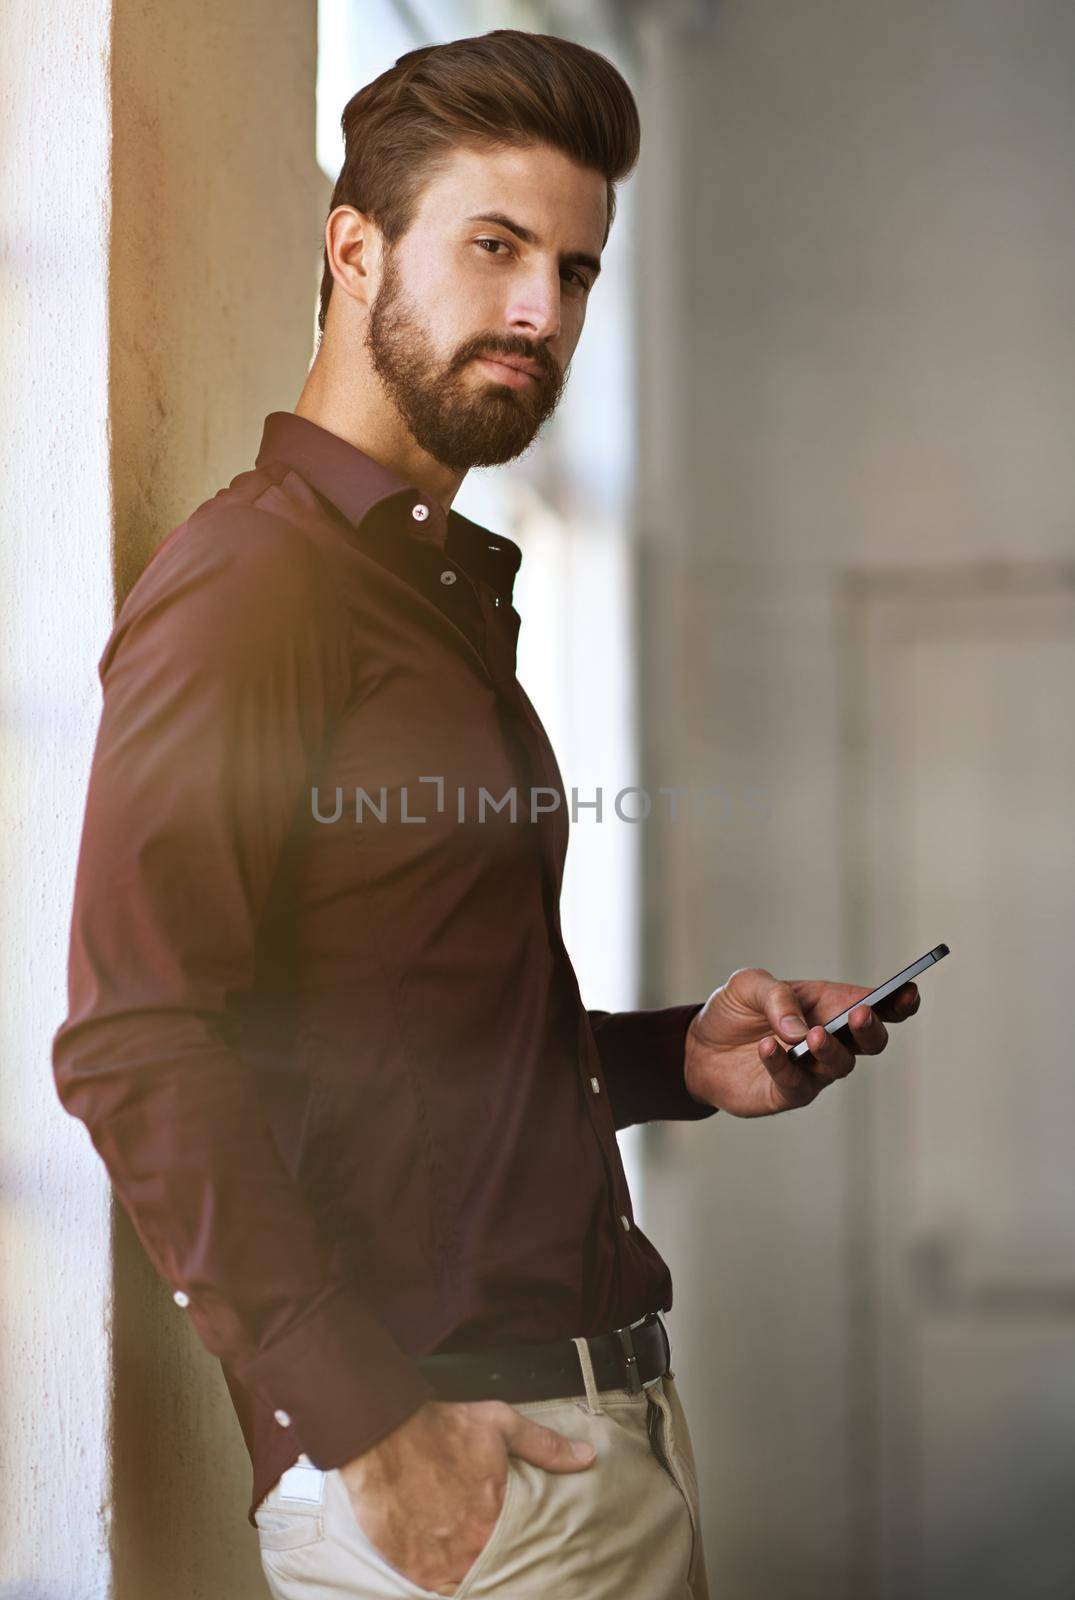 Efficient communication brings quicker results. Cropped portrait of a businessman sending a text in his office